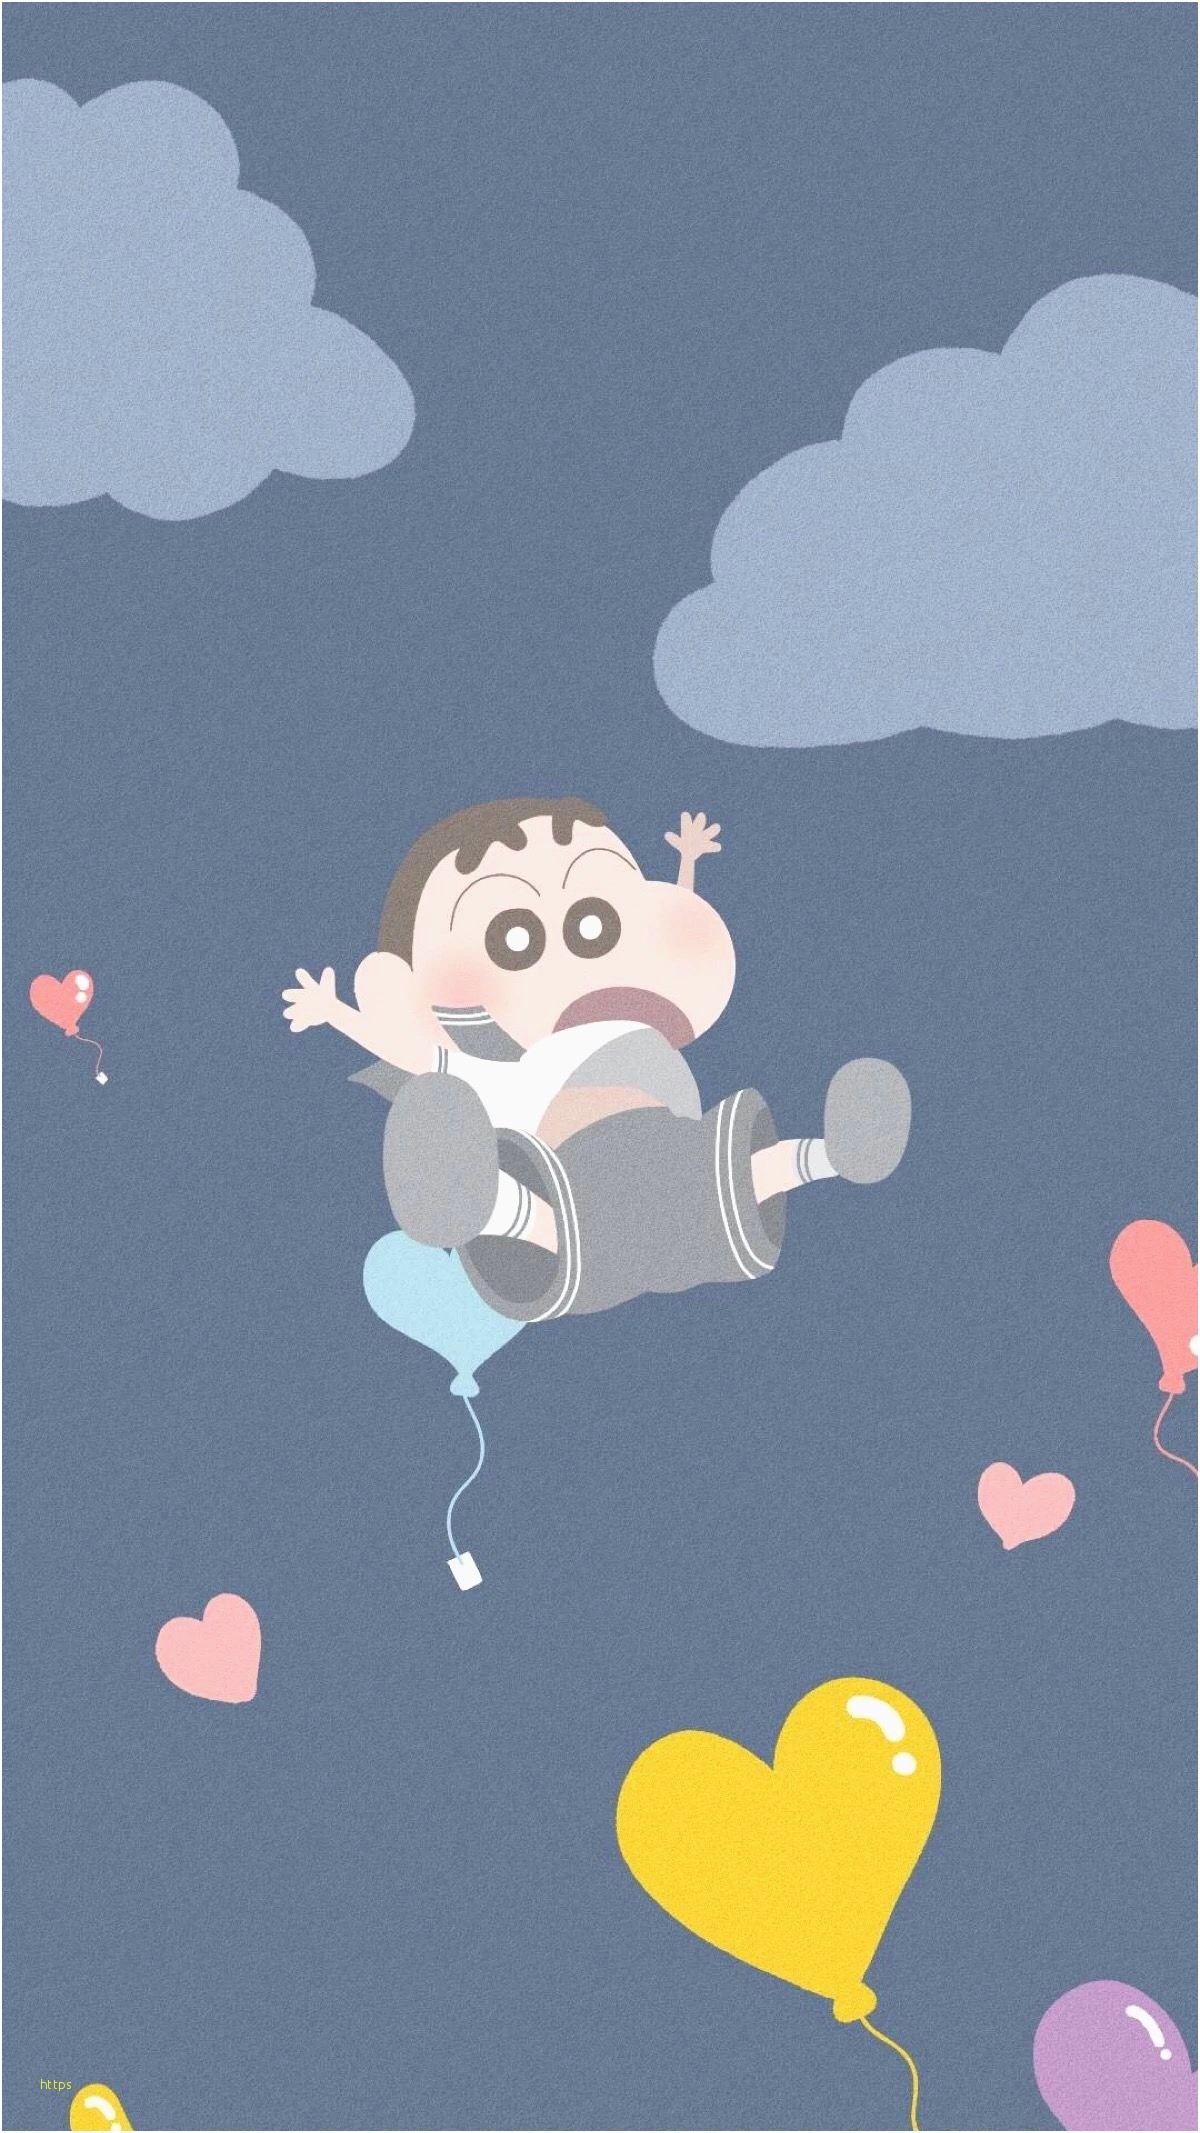 Cute Animated Love Wallpapers posted by Michelle Simpson